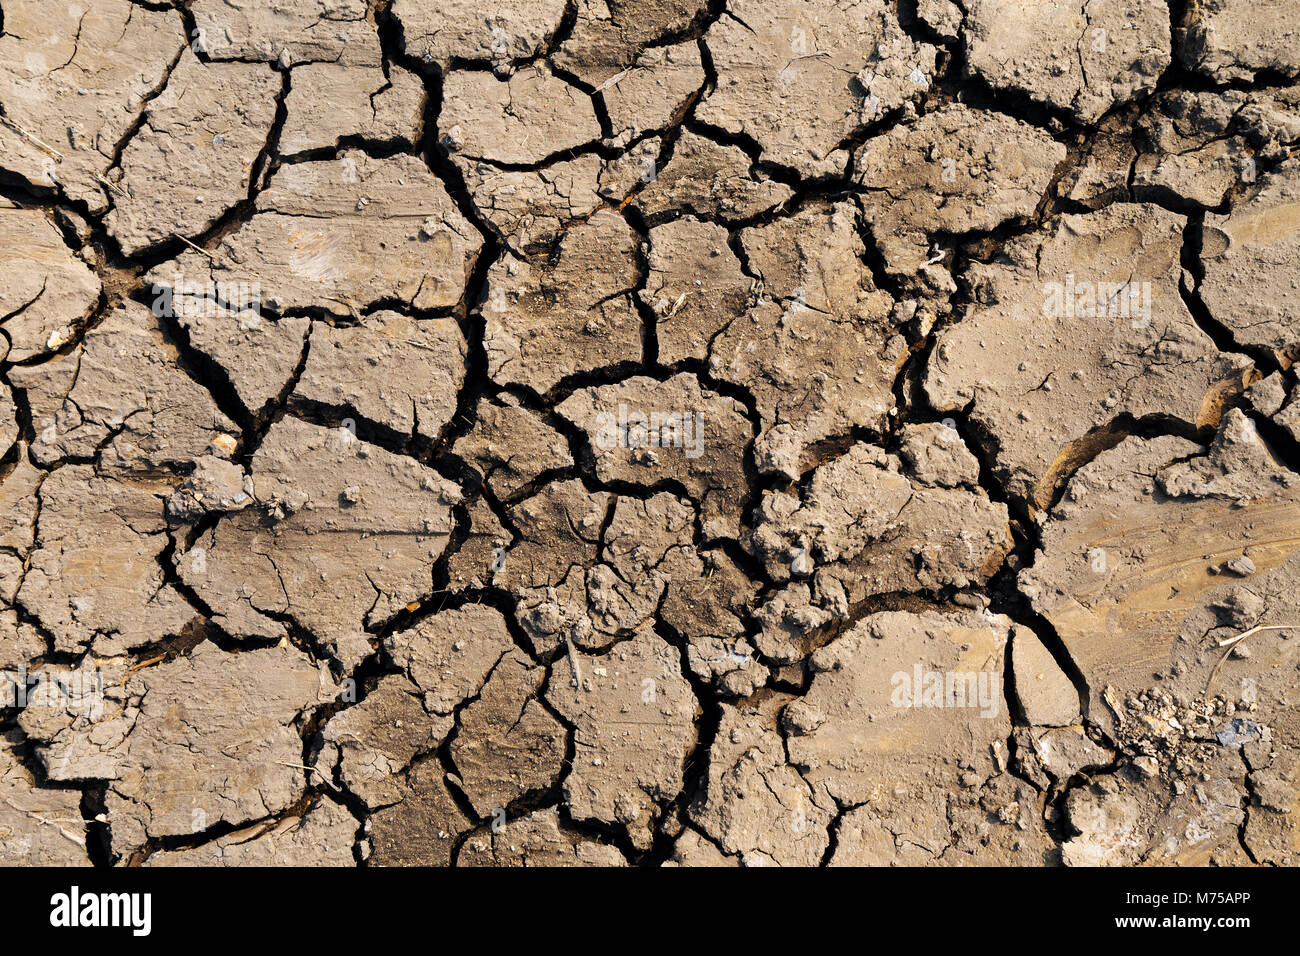 dry soil cracked at the rice field in the El Nino climate effect. Stock Photo